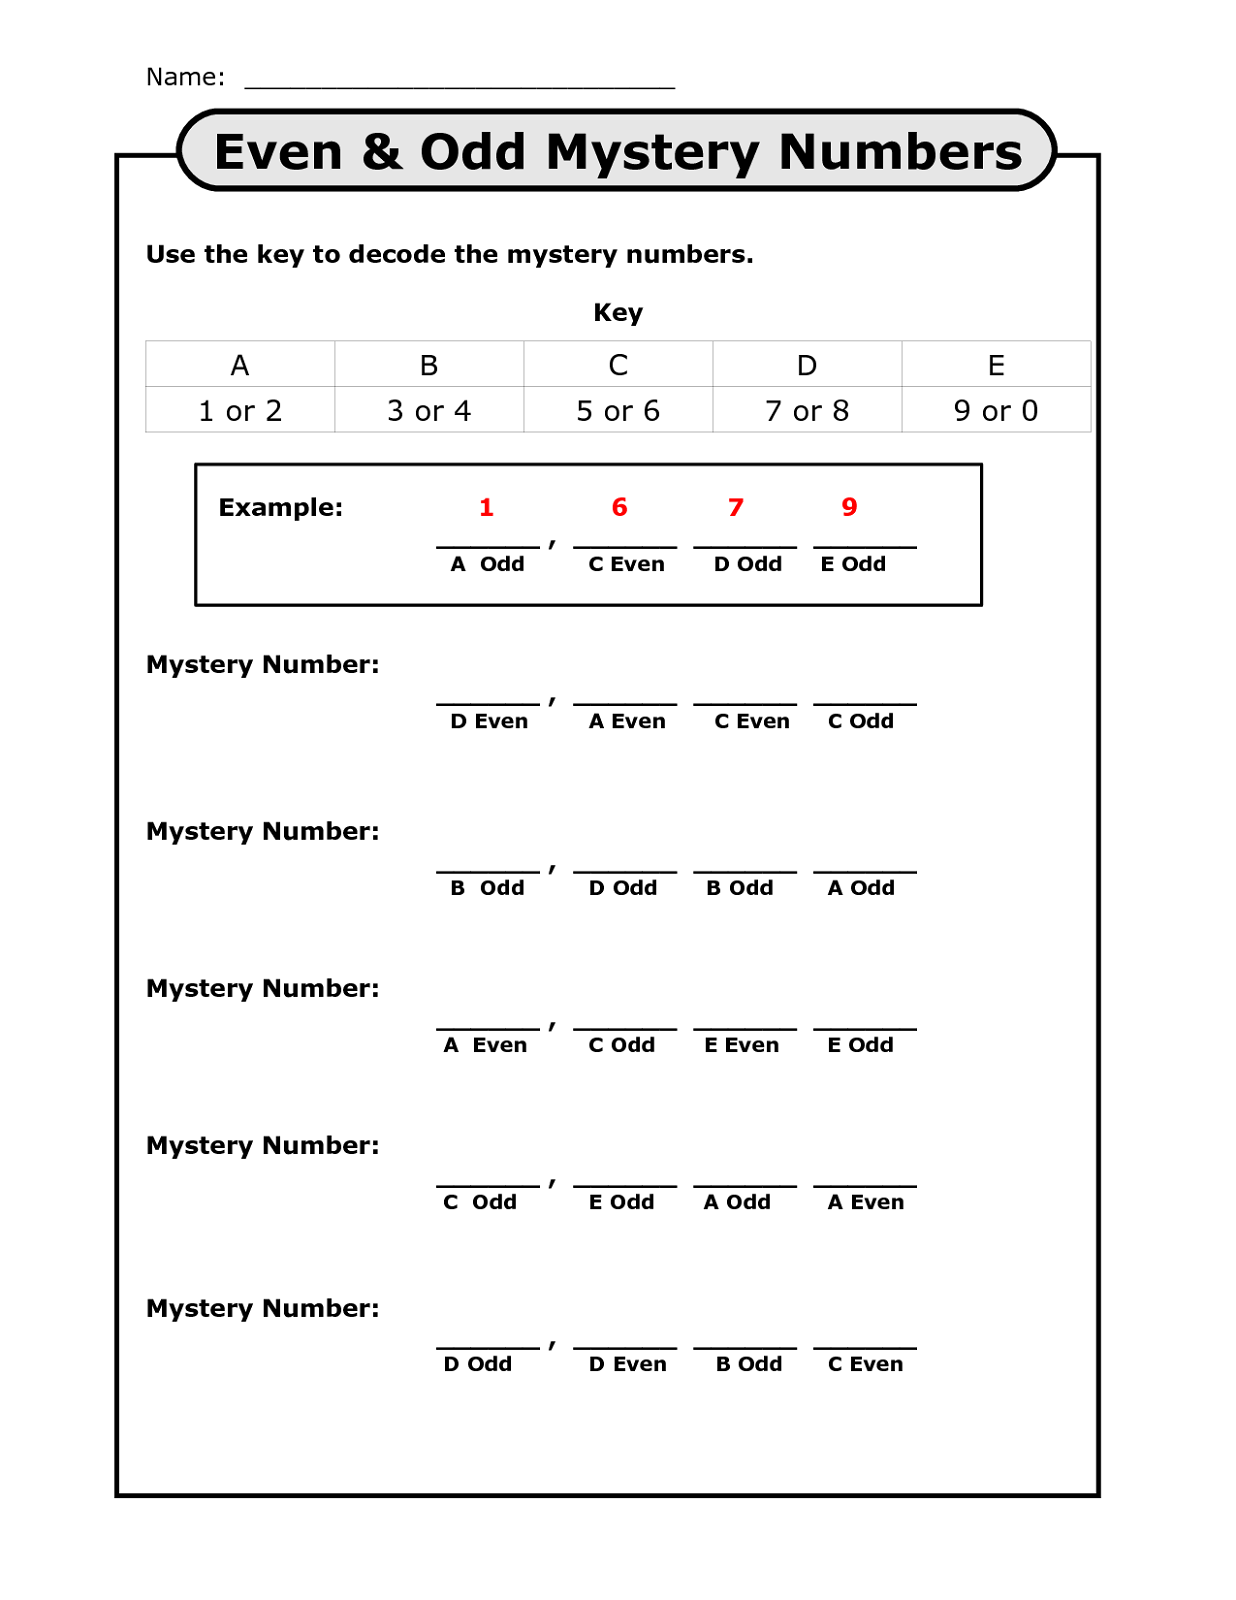 odd-and-even-numbers-worksheets-mystery